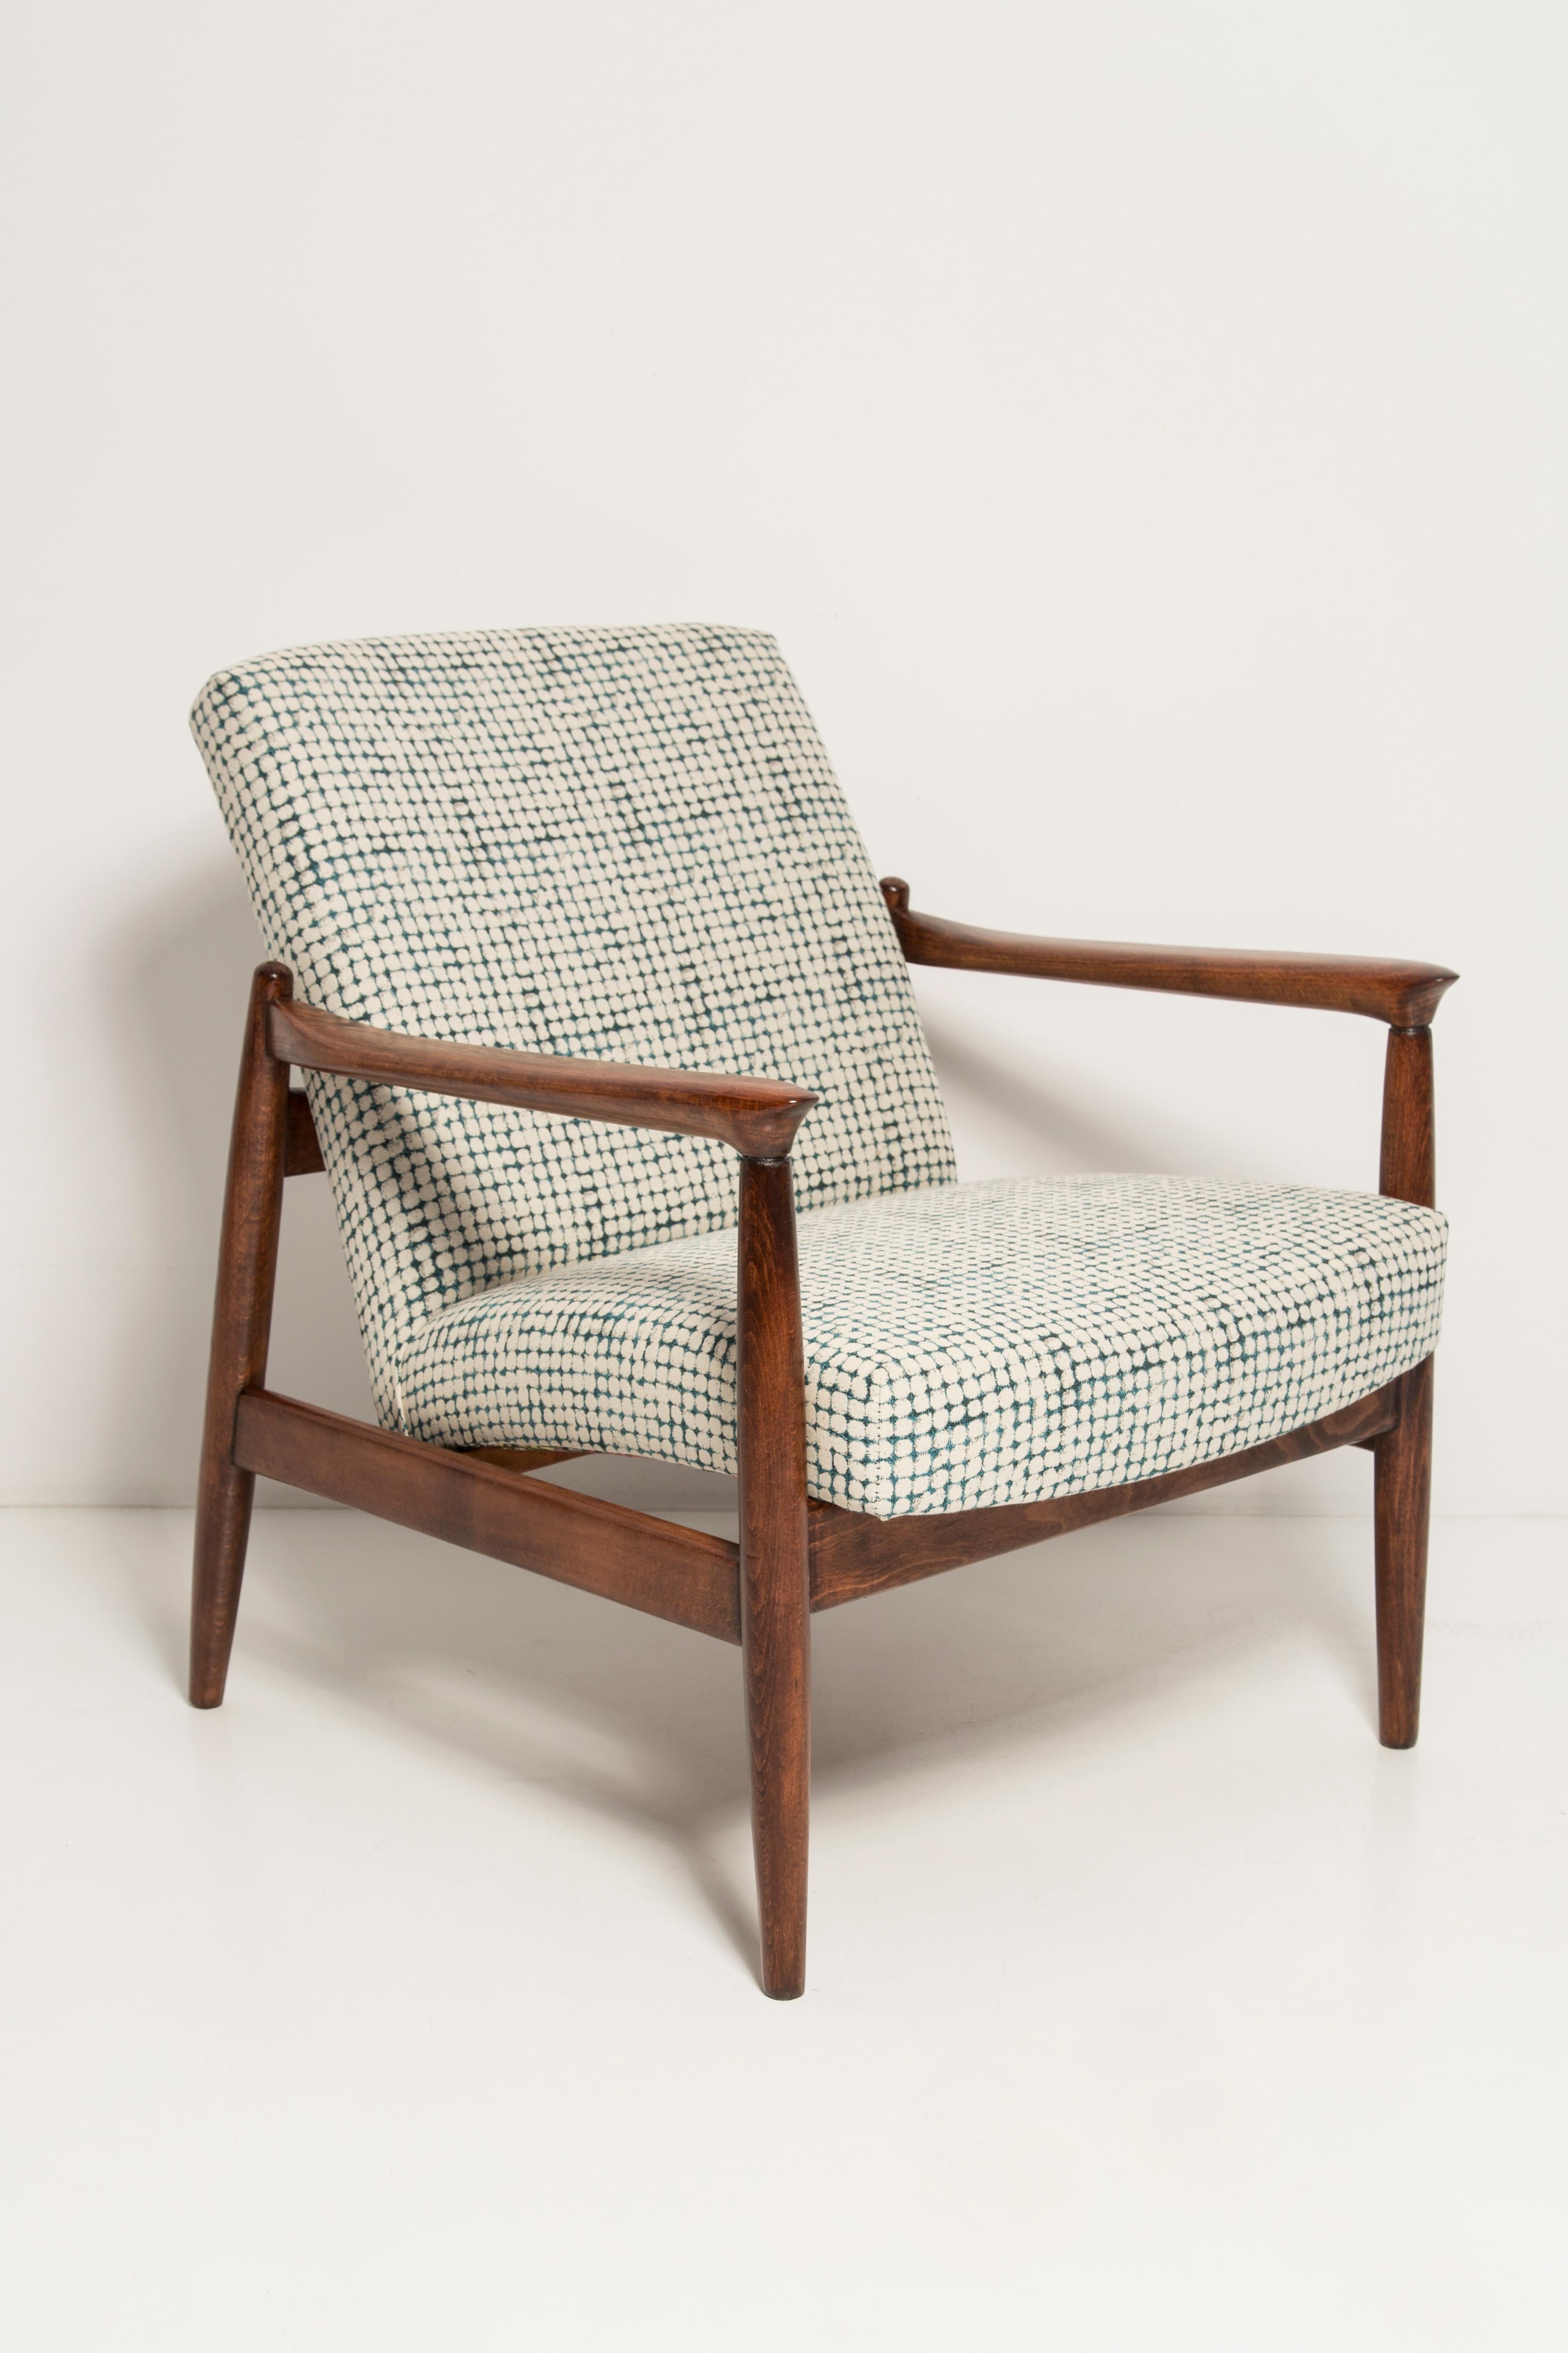 Beautiful armchair and foot stool, designed by Edmund Homa. The armchair was made in the 1960s in the Gosciecinska Furniture Factory from solid beechwood. The GFM type armchair is regarded one of the best polish armchair design from the previous